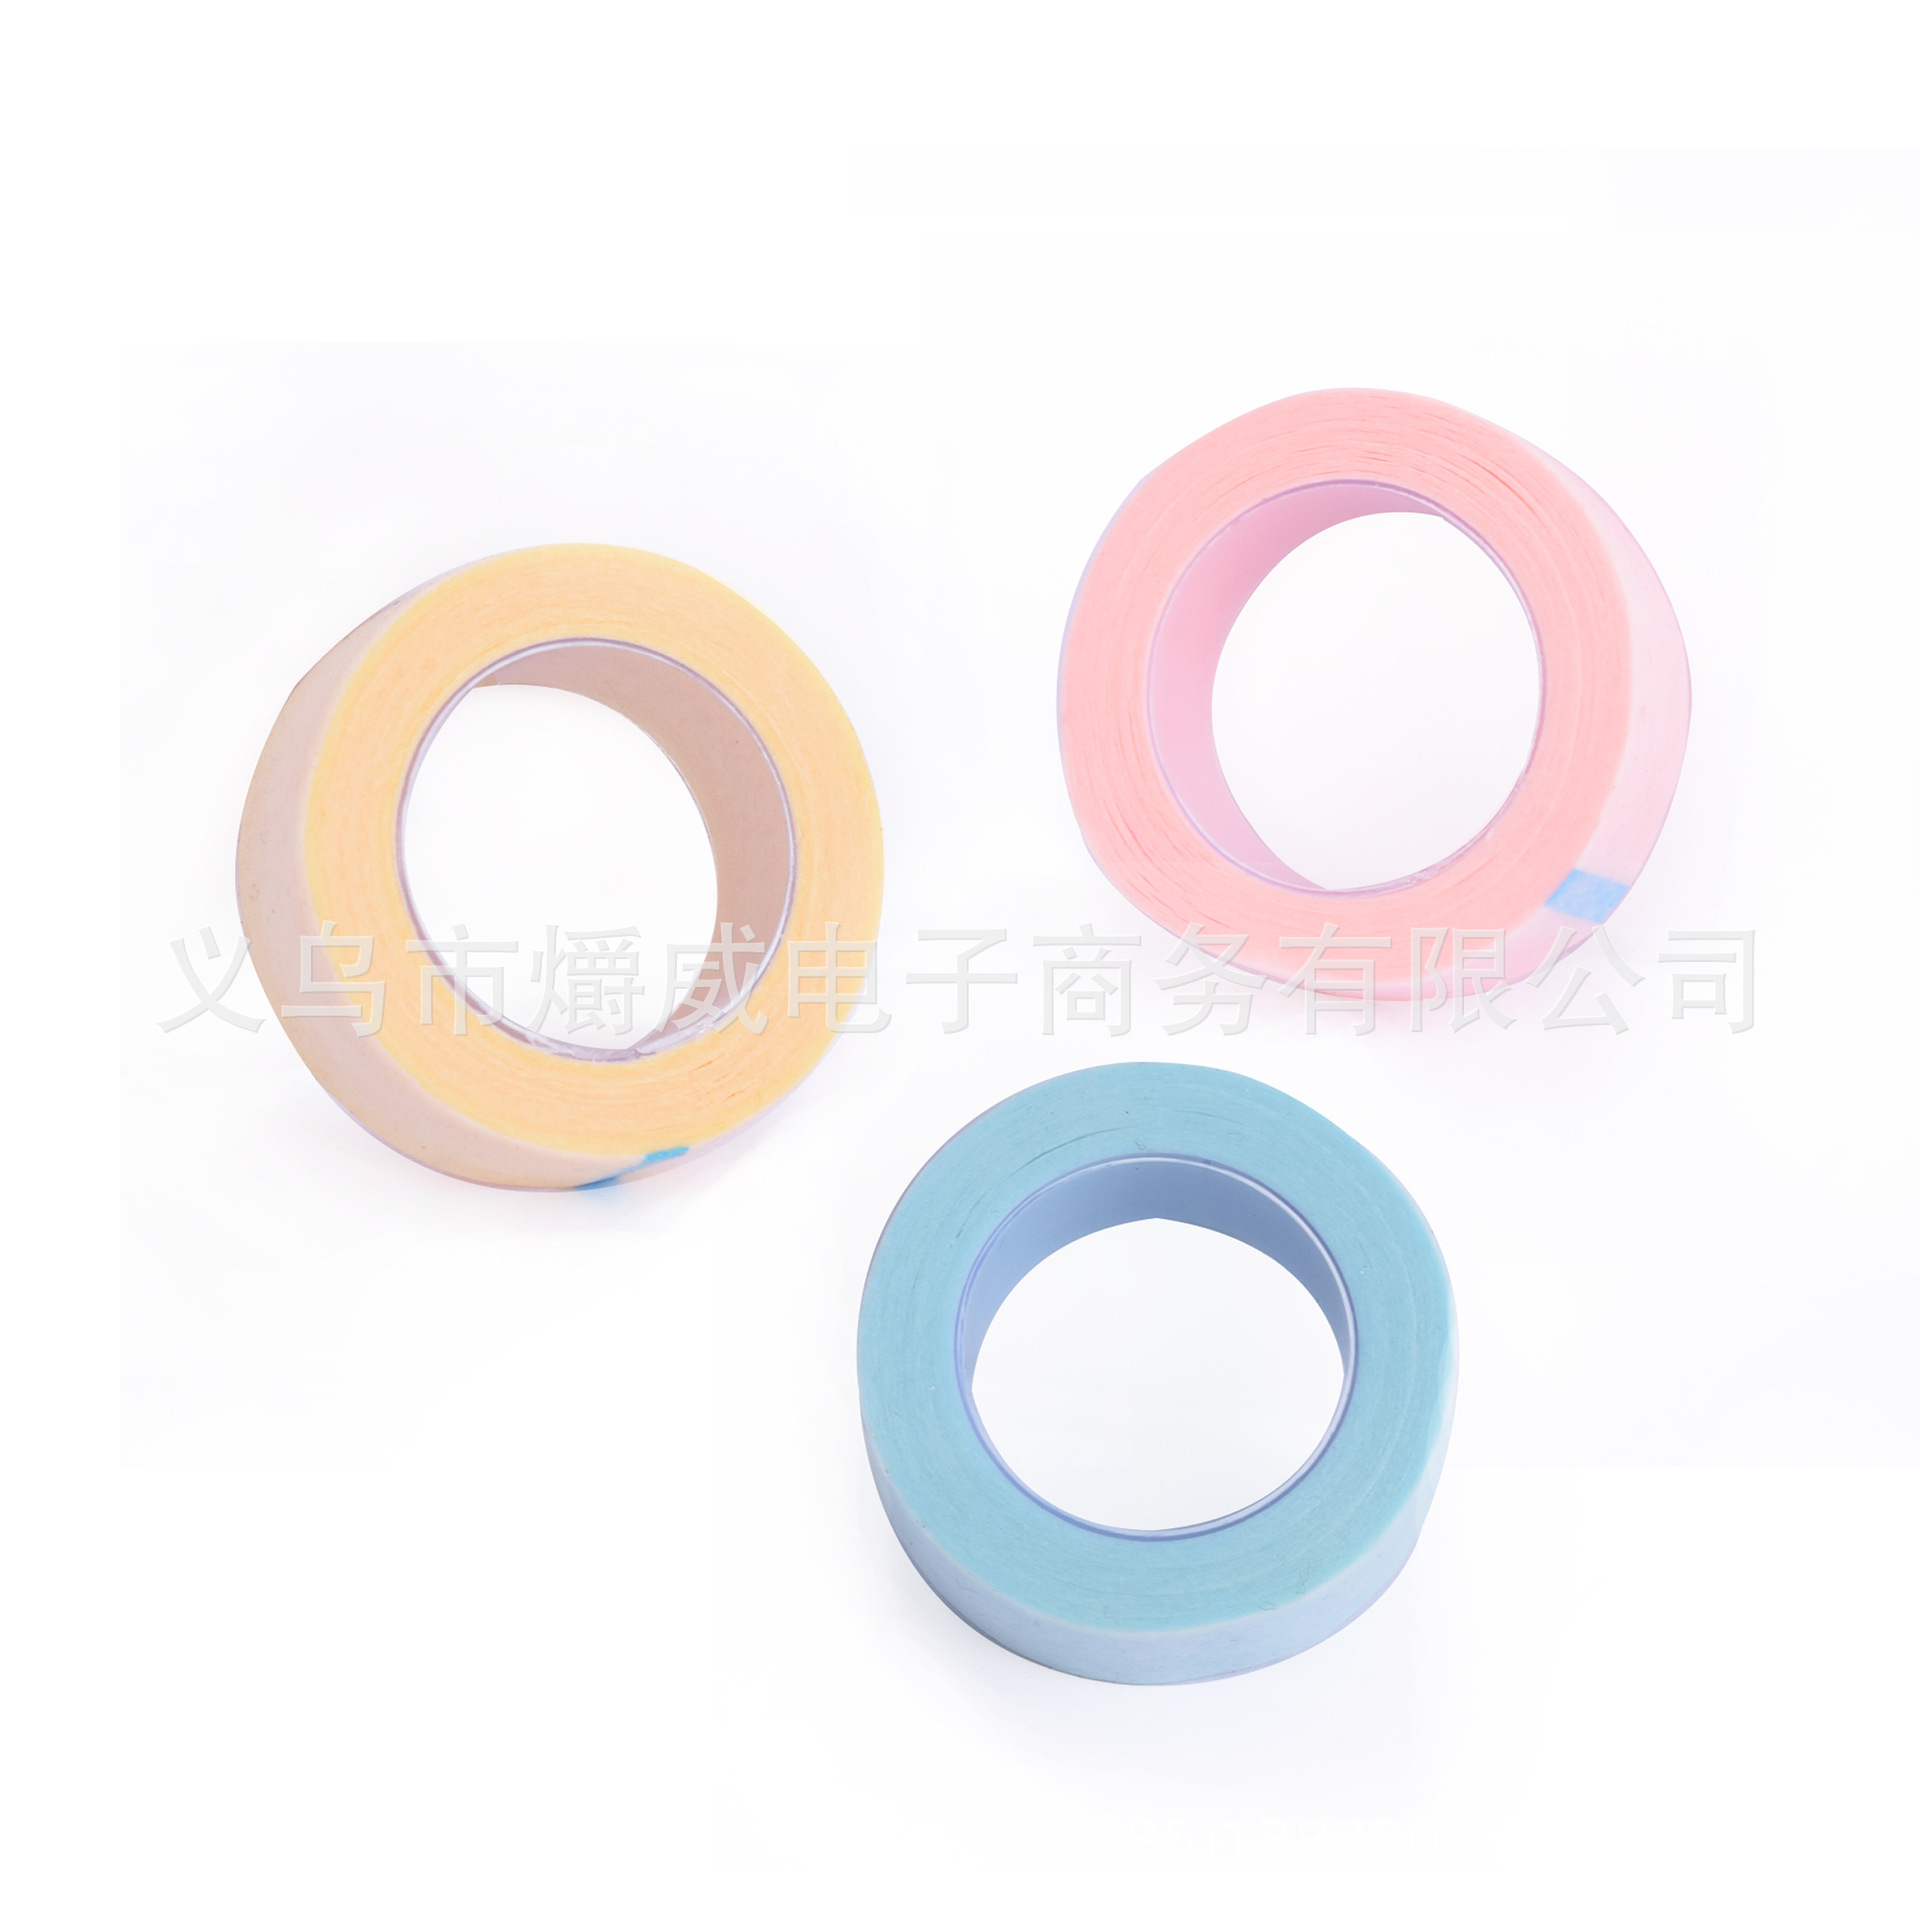 Grafting eyelashes non-woven tape pink y...